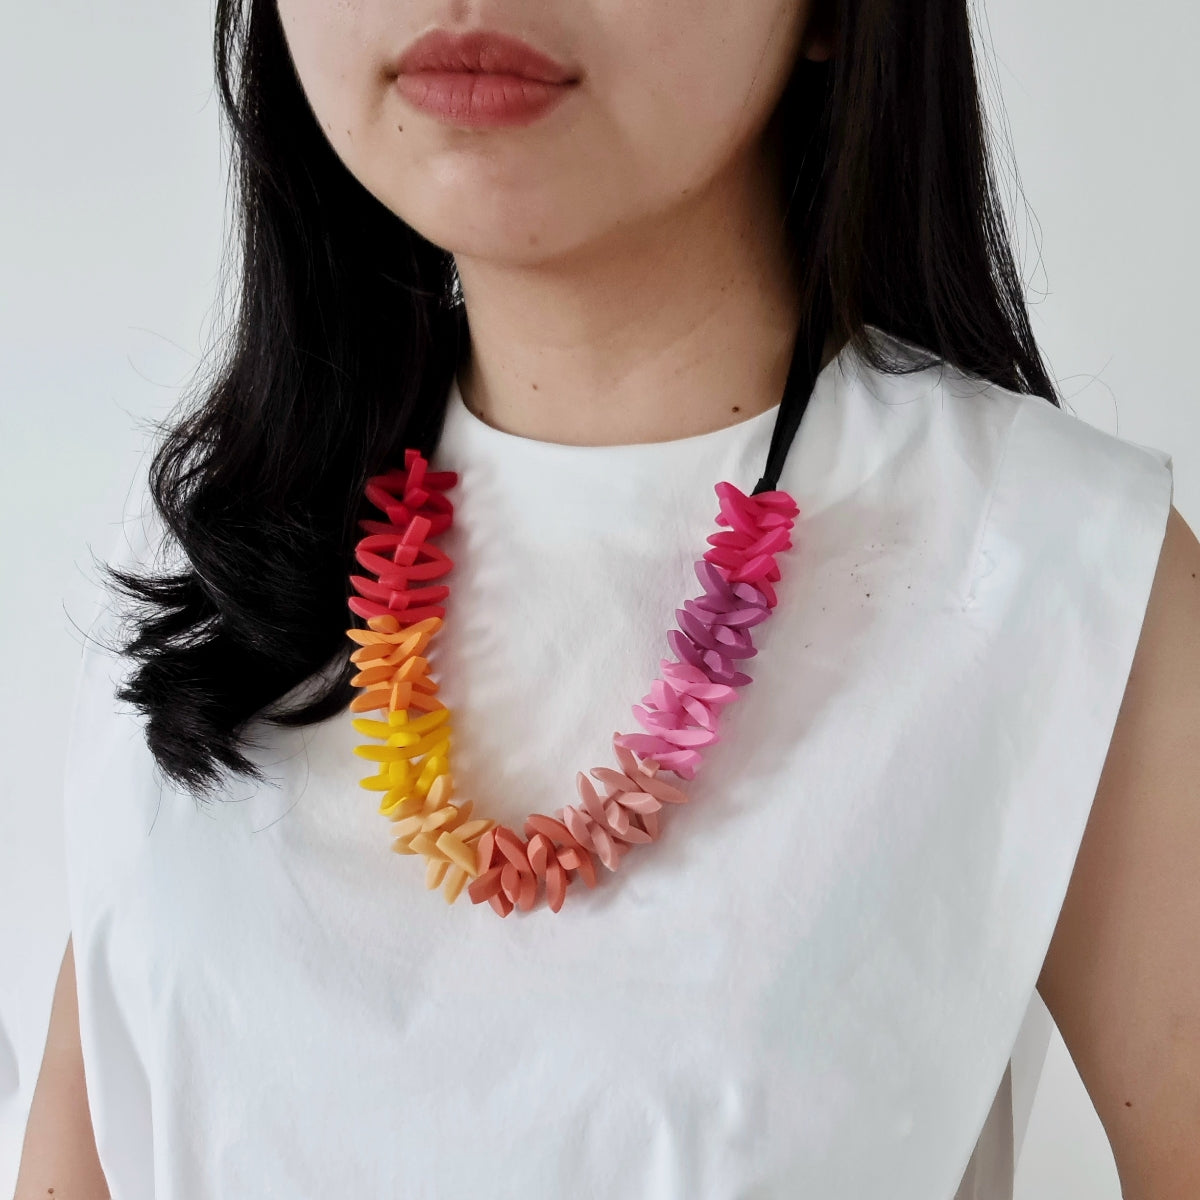 Jenna Ombre Red Necklace